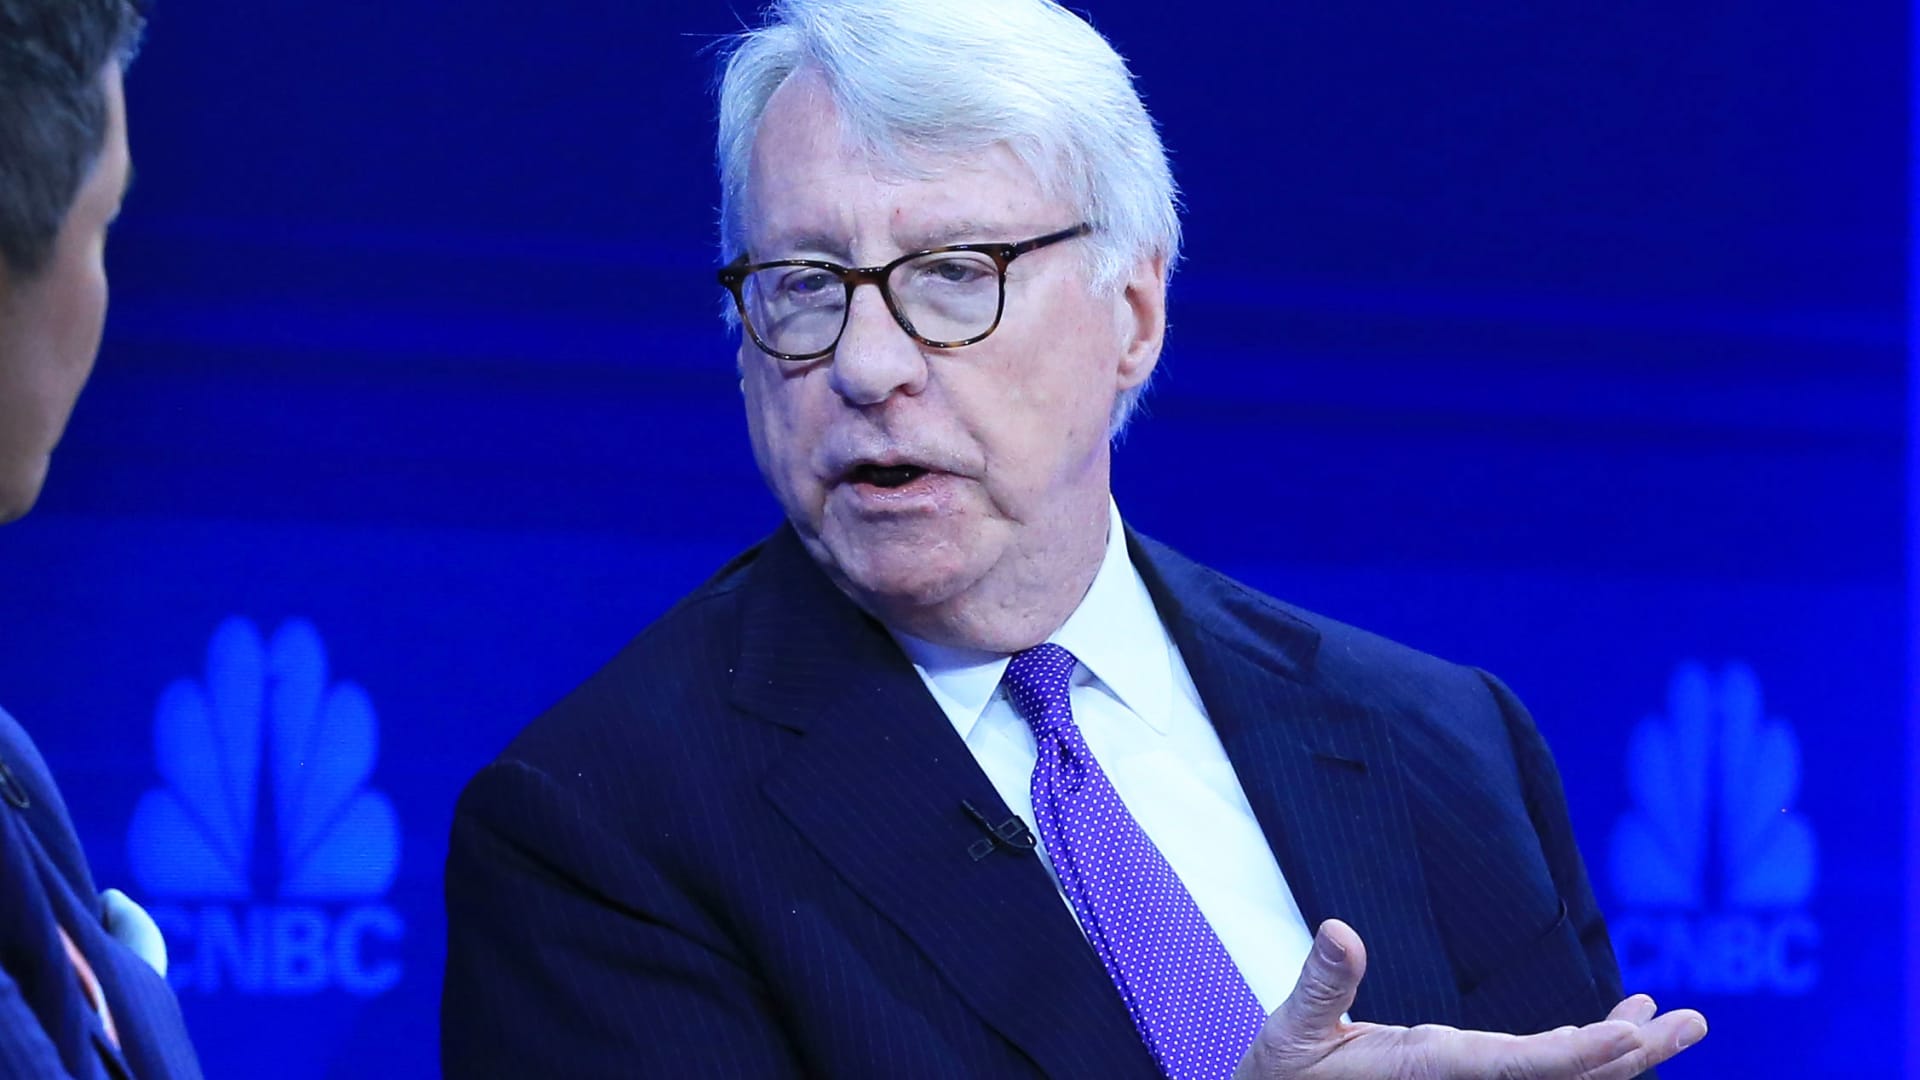 Jim Chanos says he's still shorting Tesla as EV competition increases, profit margin peaks